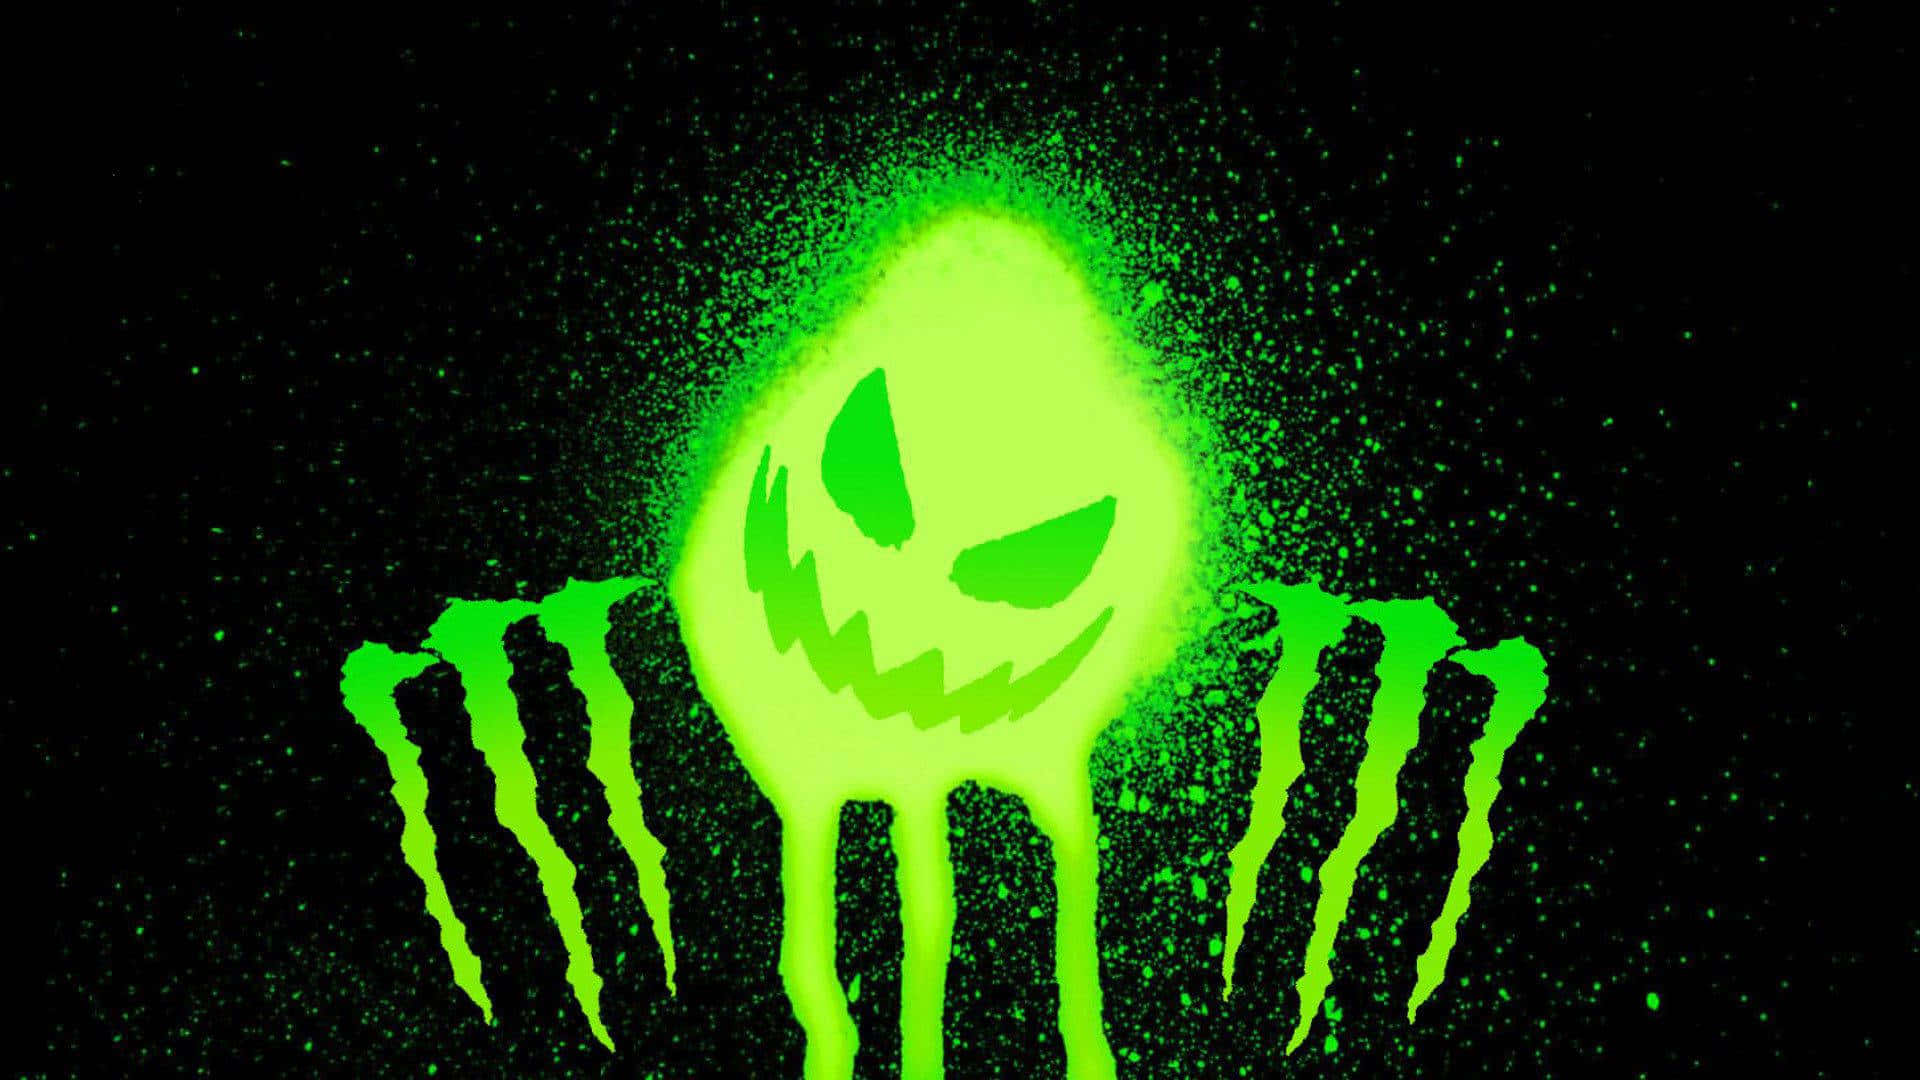 The monster with green eyes and a glowing mouth - Lime green